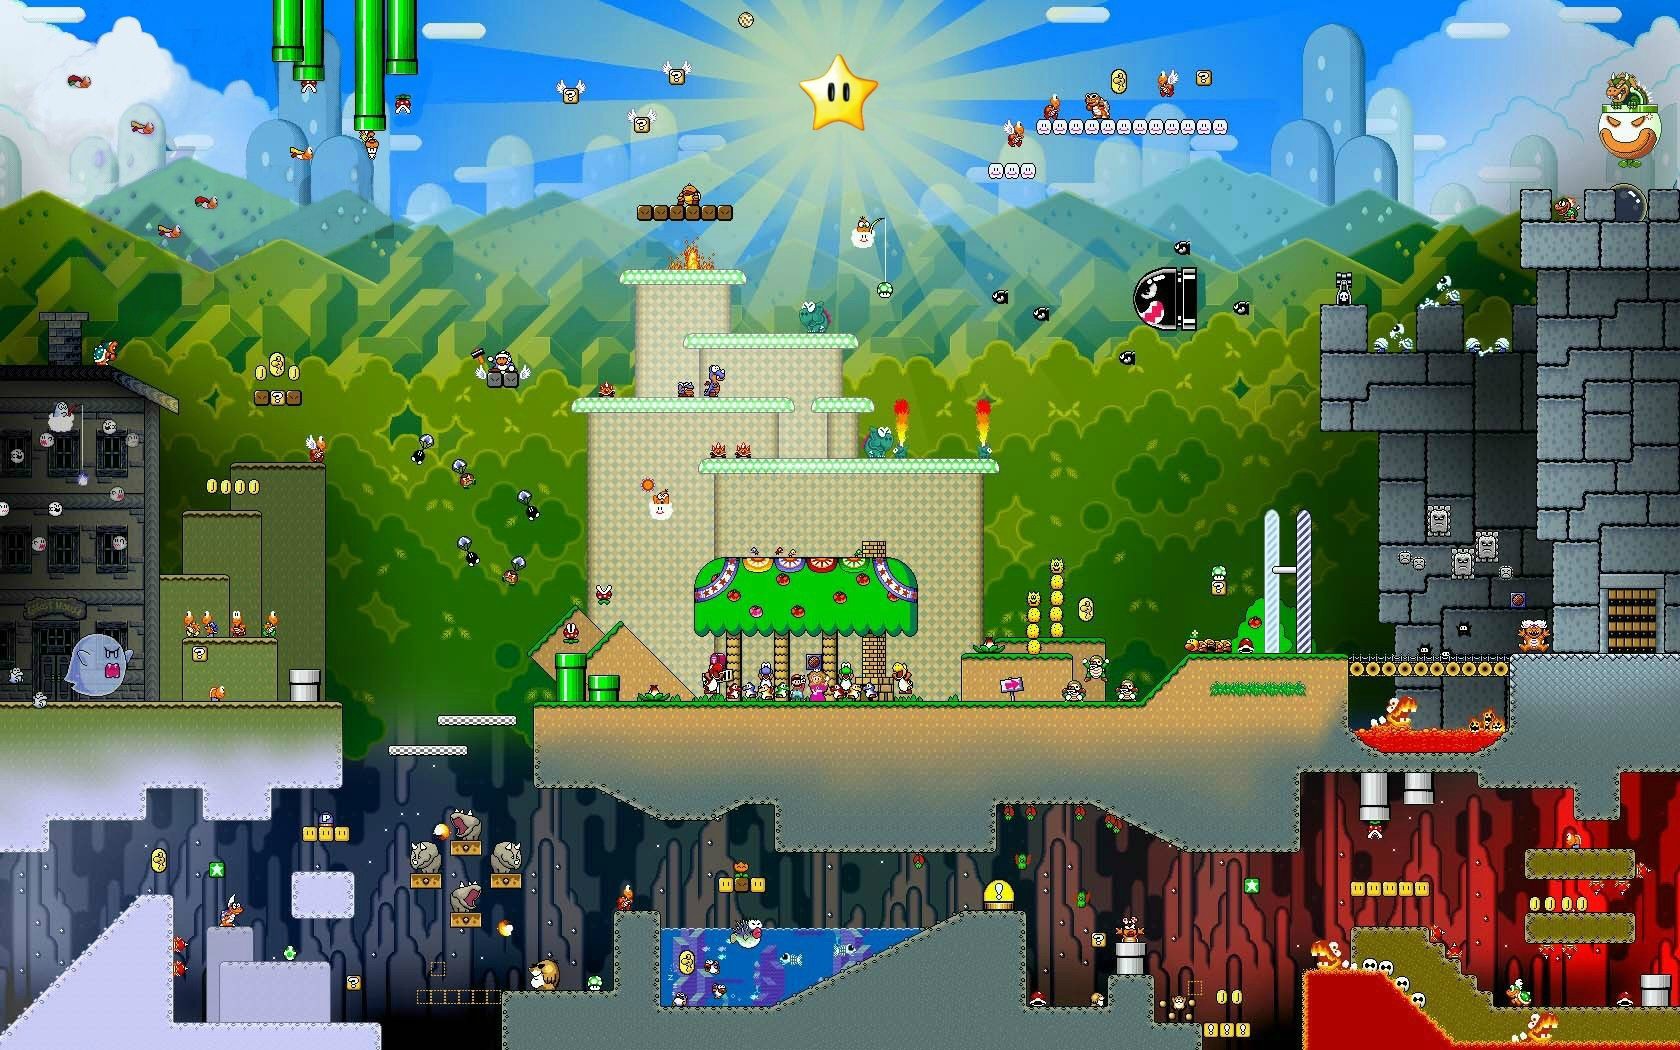 Awesome Super Mario Wallpaper | The Digital Record